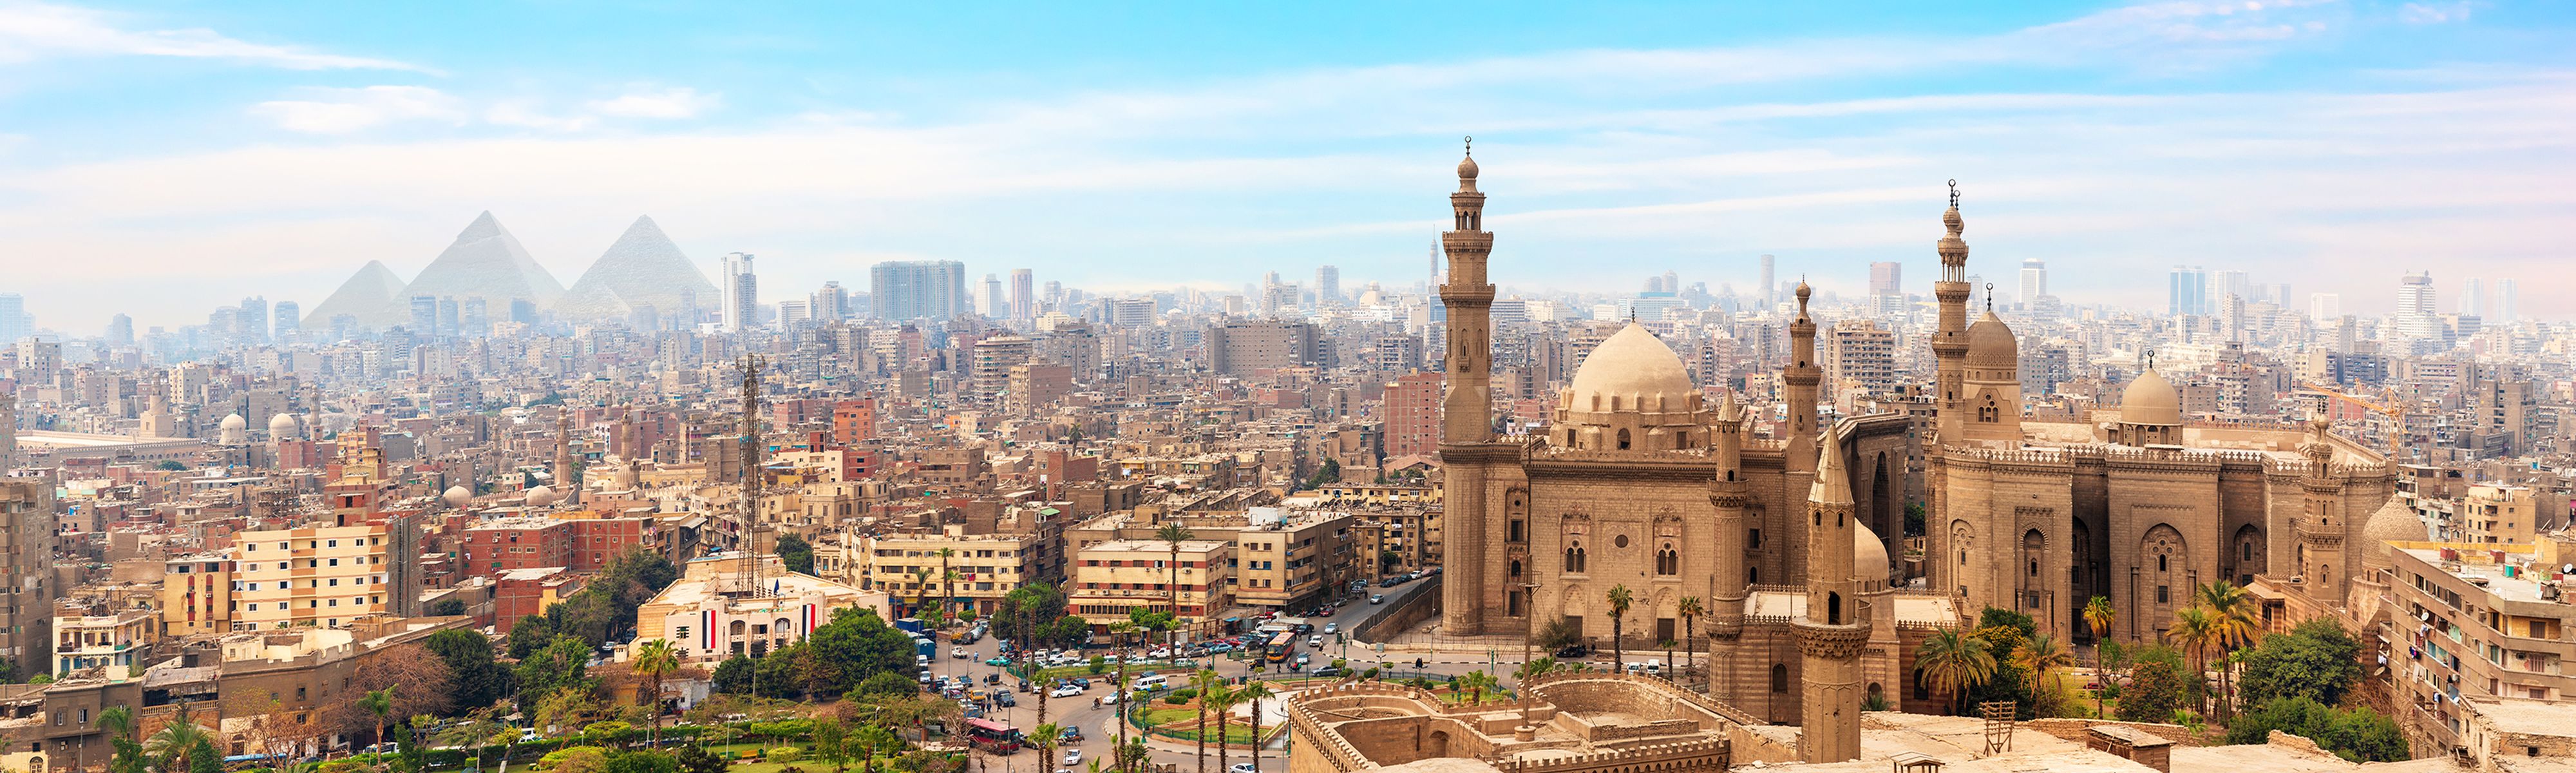 city scape of cairo in egypt during the day